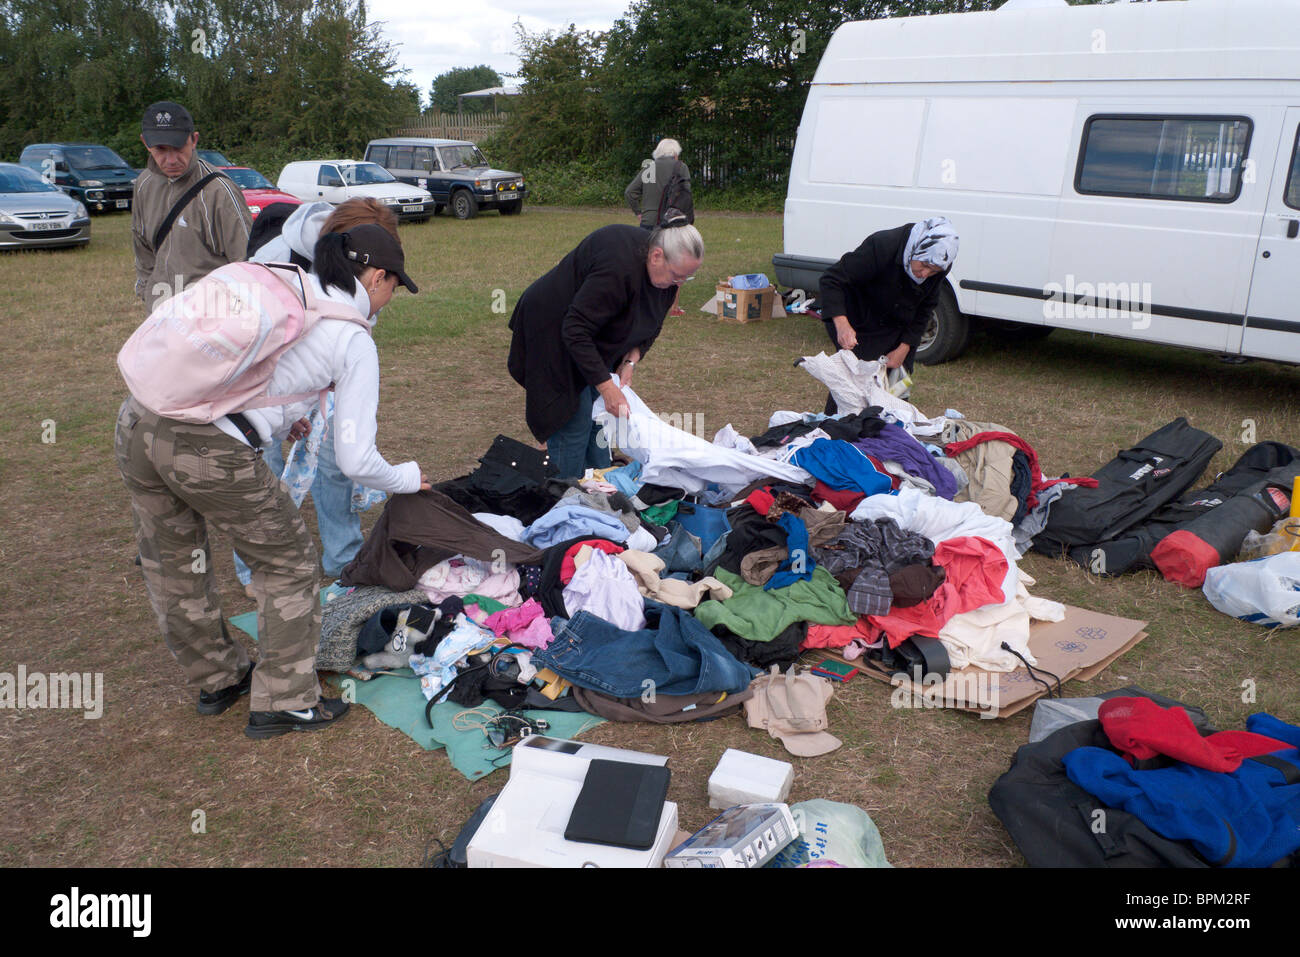 Buyers hunt for bargain clothes at car boot sale at Apps farm, Surrey, England Stock Photo